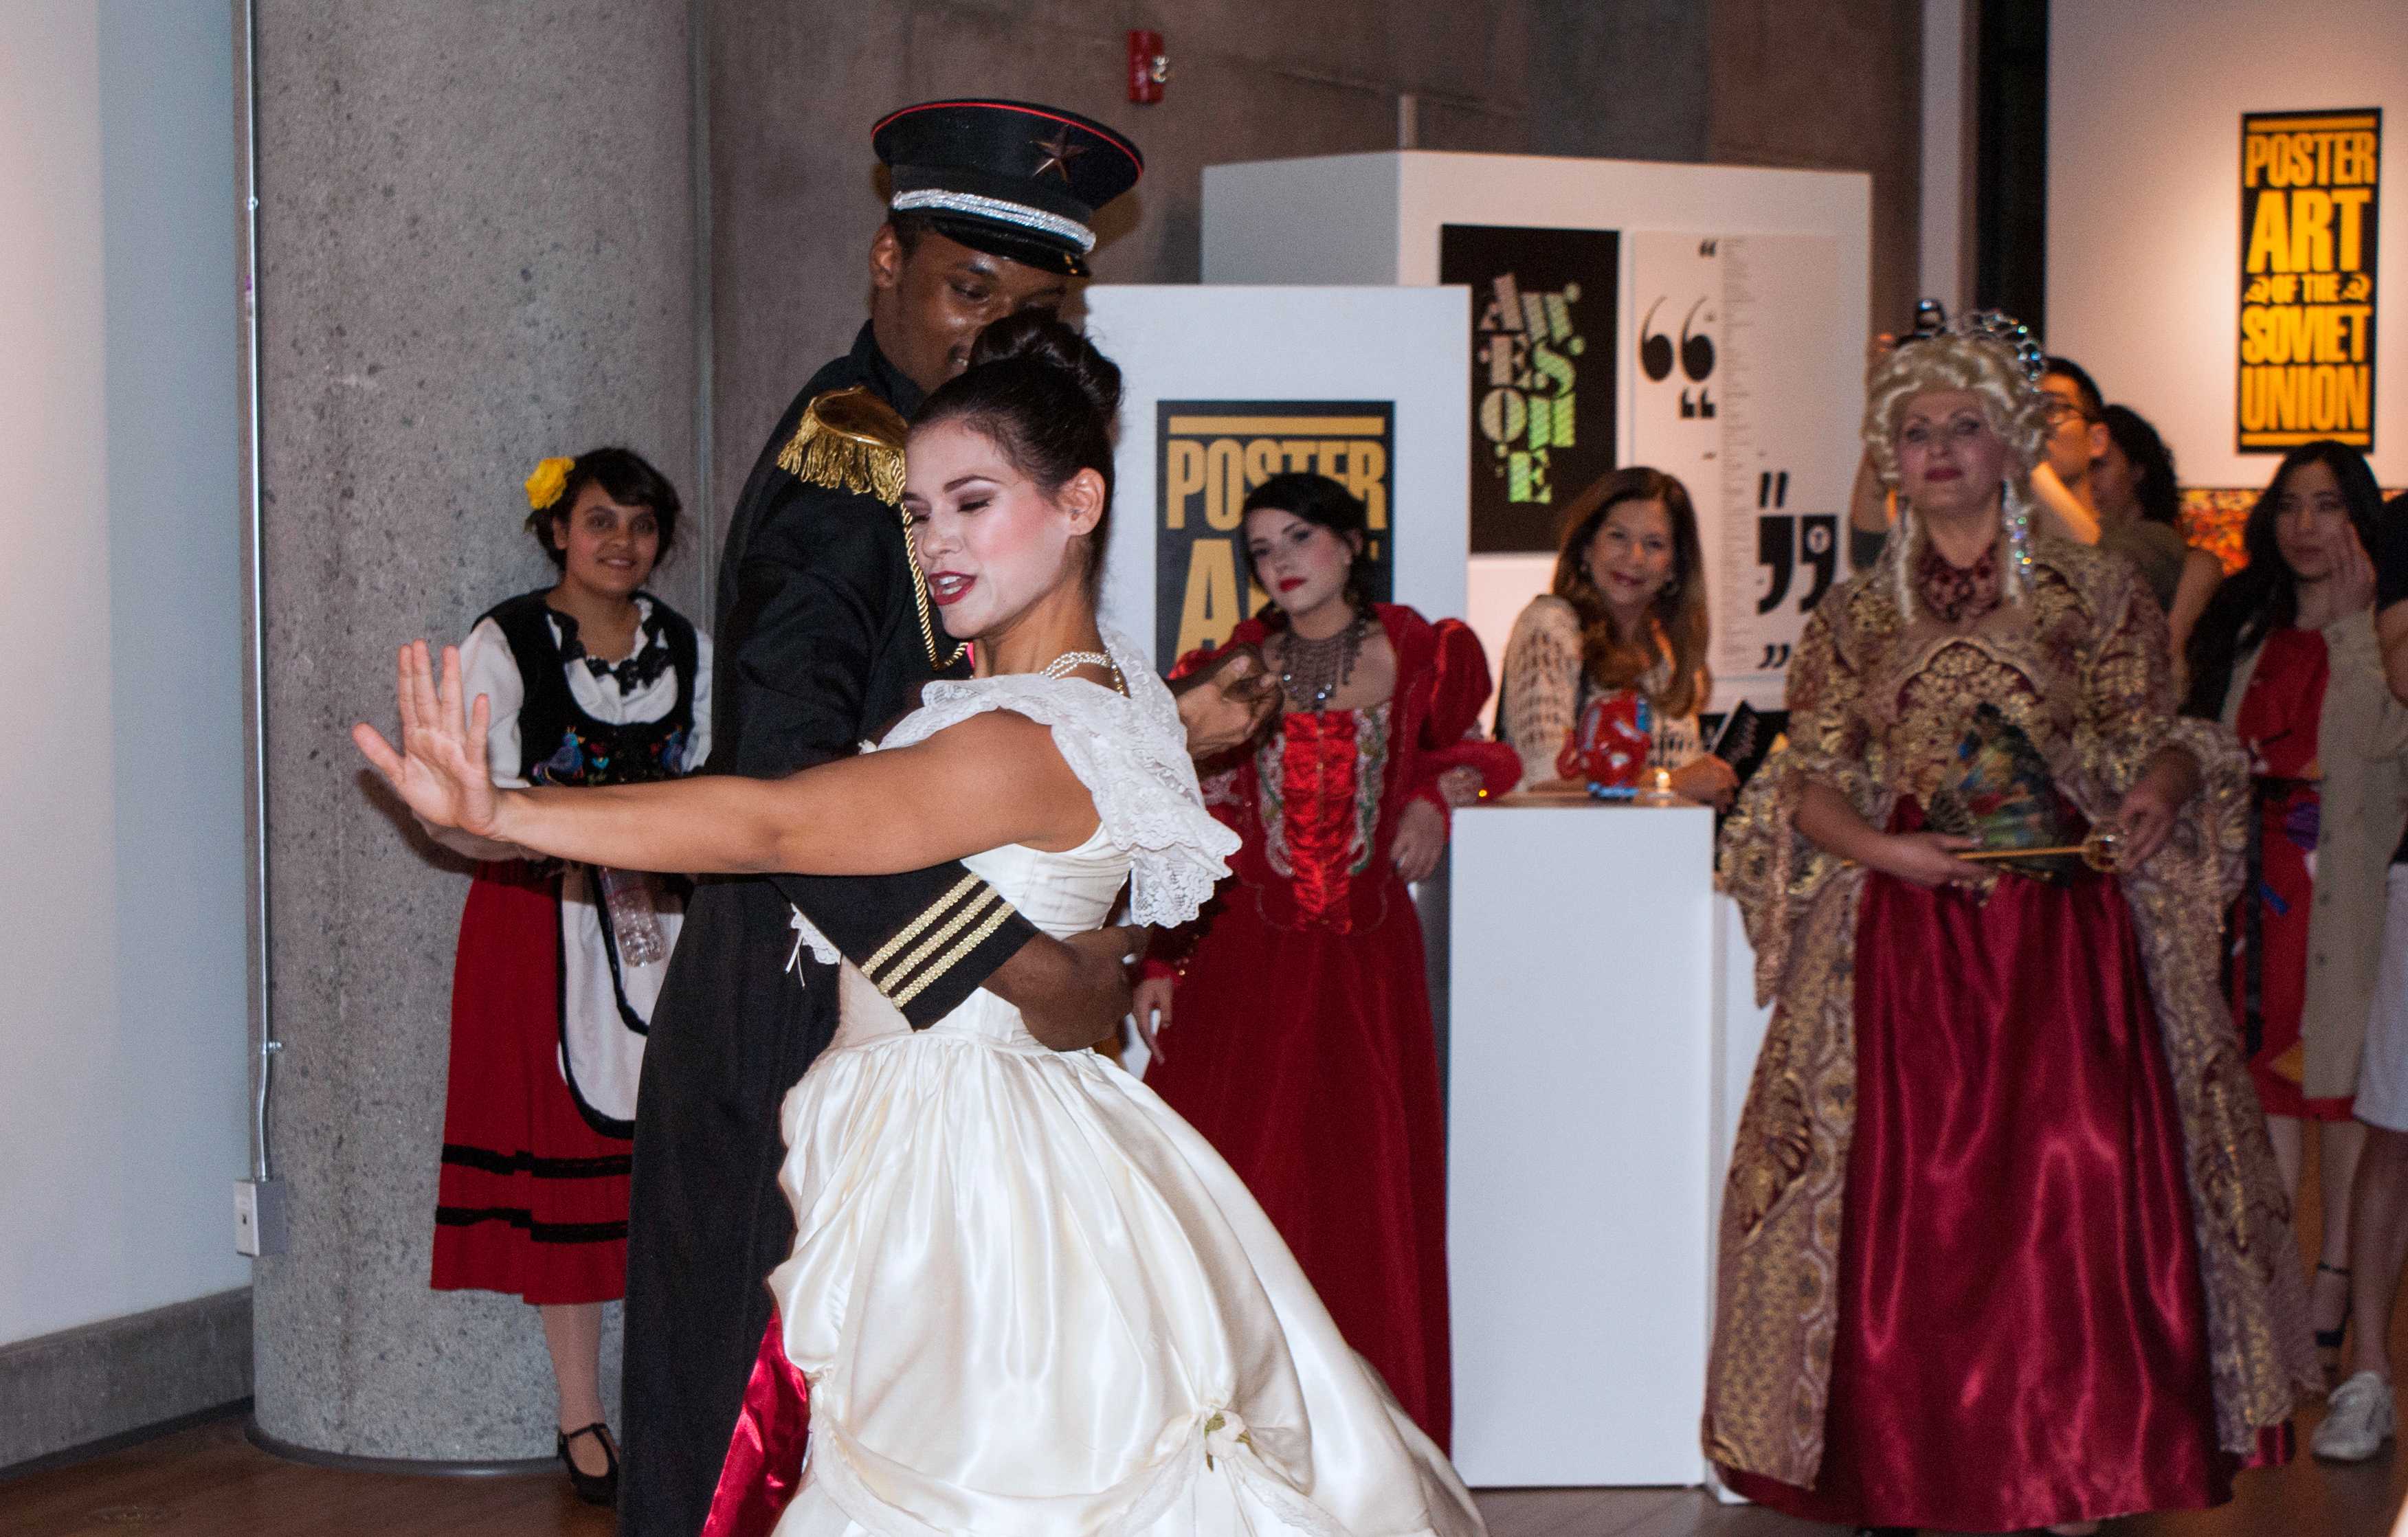 City College dancers Dante Finch and Brianna Bellamy perform a traditional Russian waltz in the center of the City Gallery as part of the opening reception for the gallery’s newest exhibition, “Dialogues: Poster Art of the Soviet Union,” on March 13. Photo credit: Torrey Spoerer